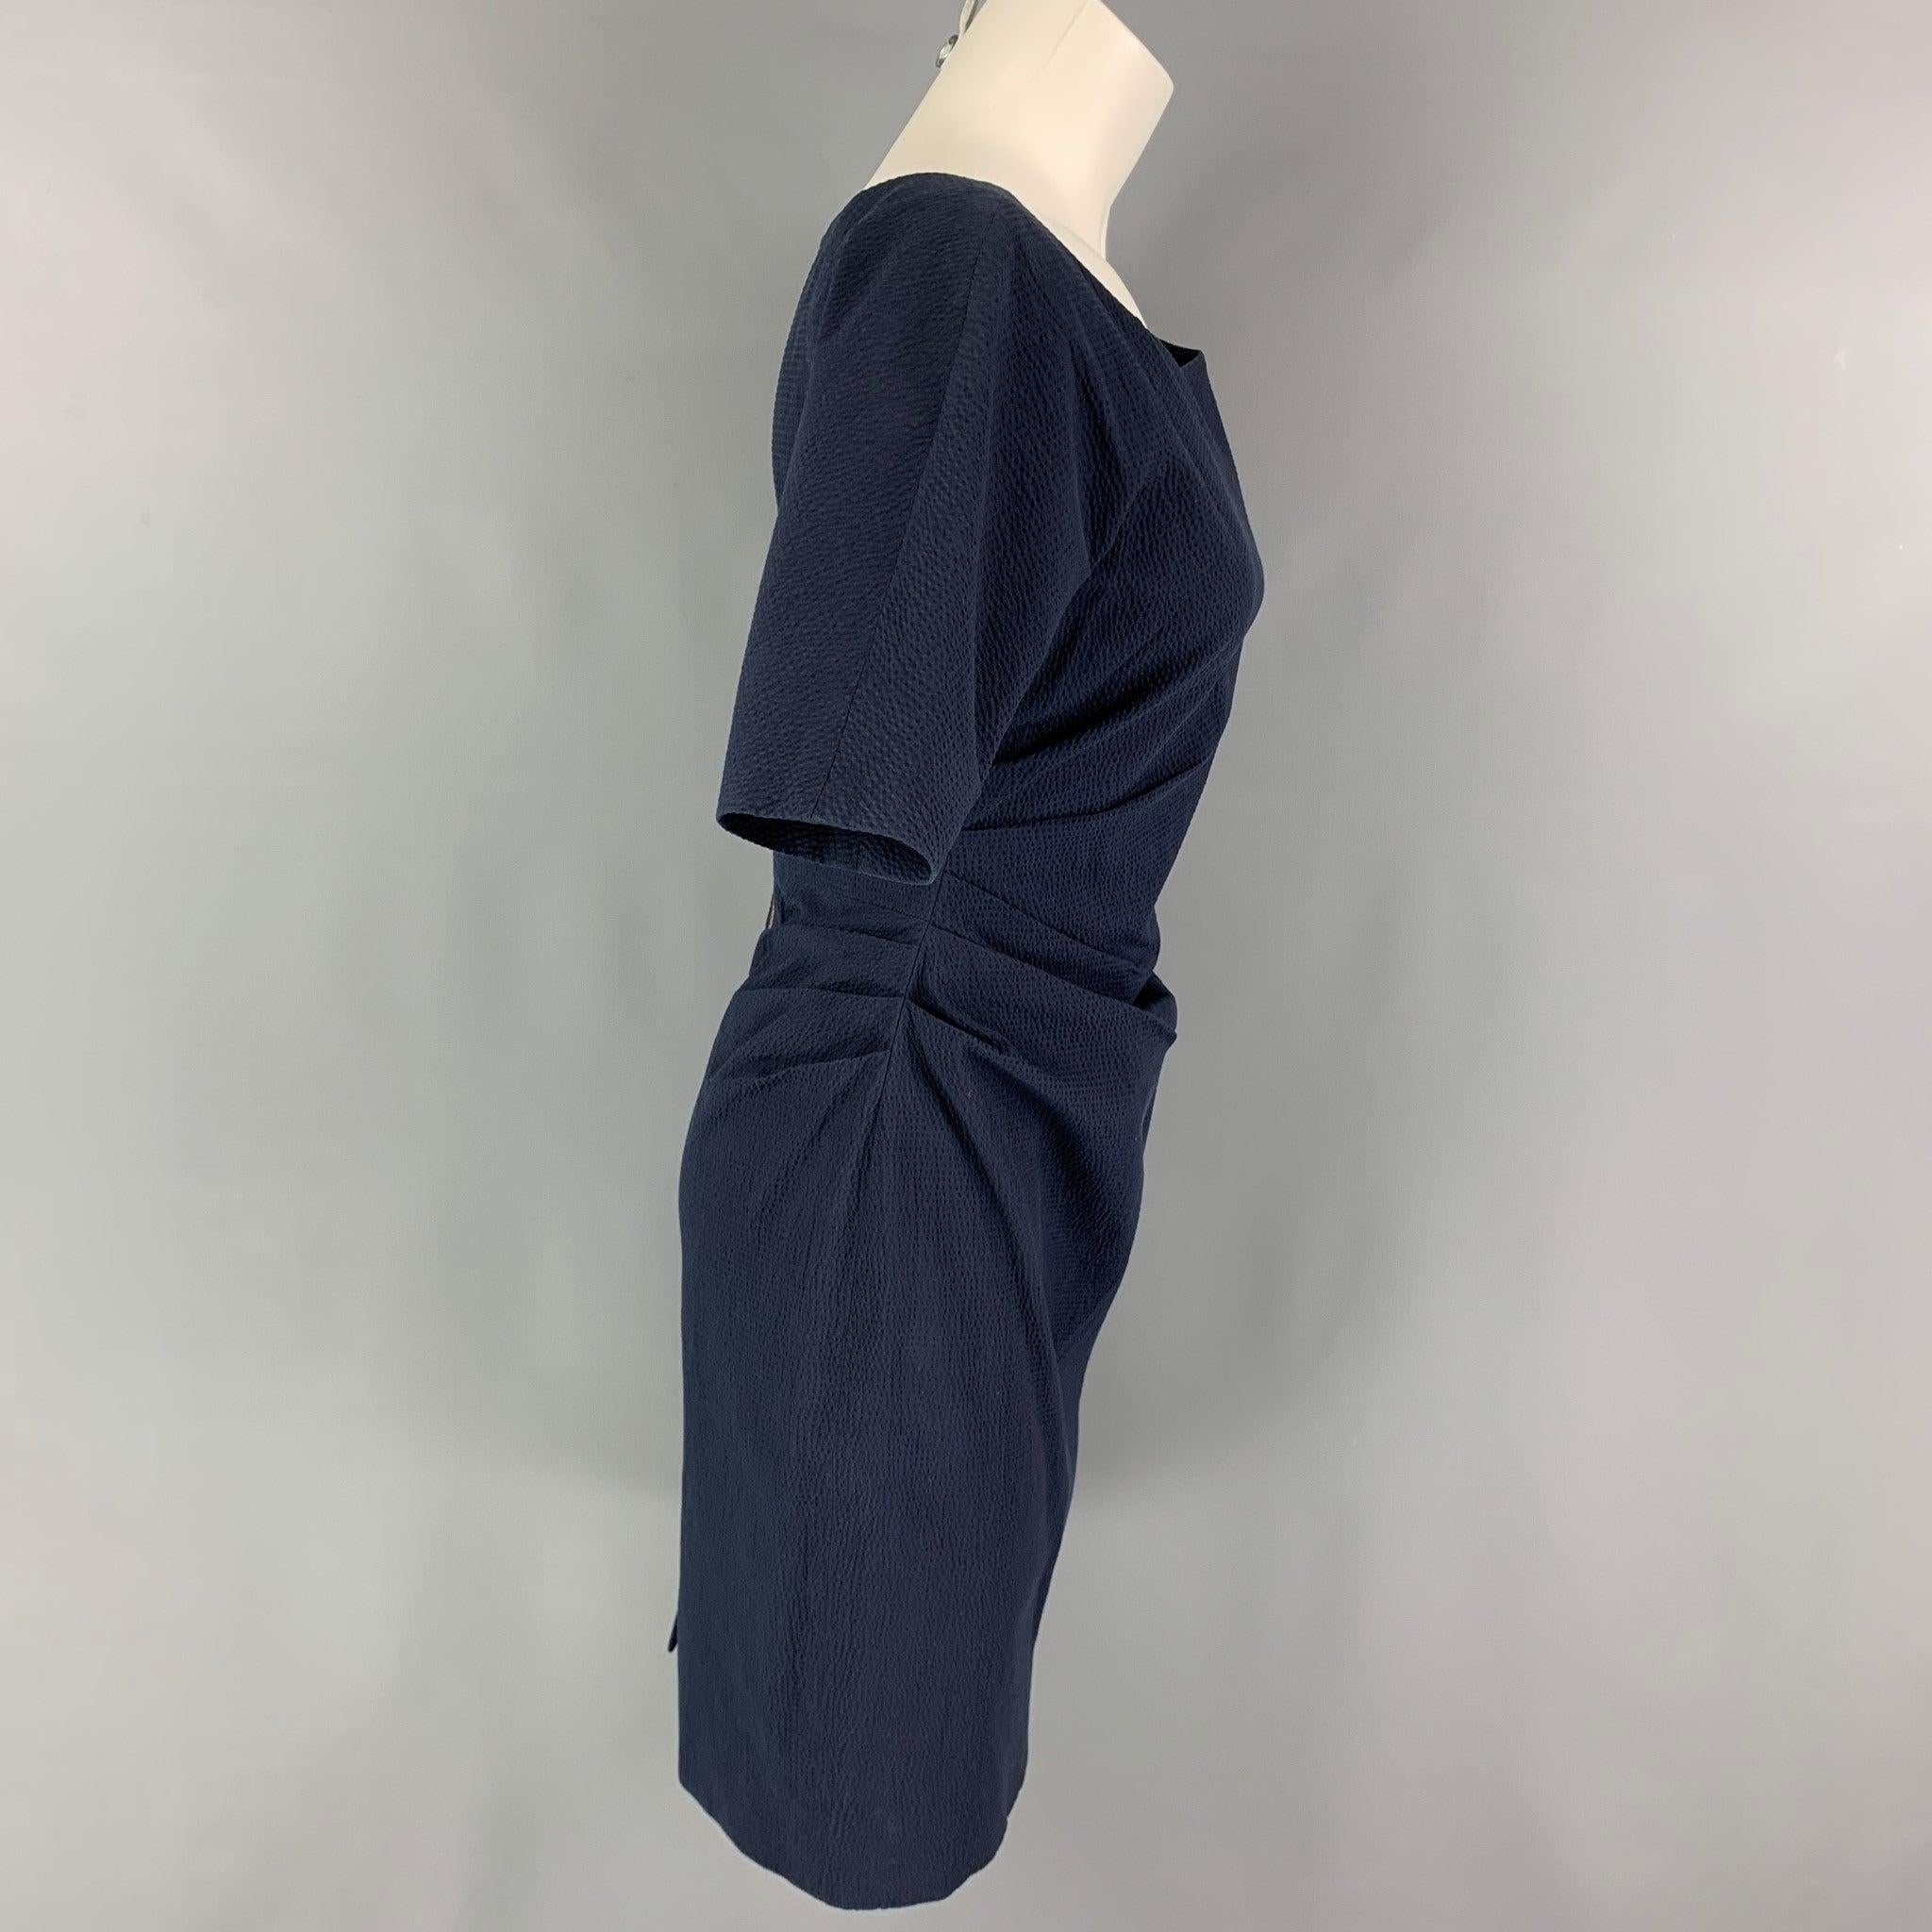 LELA ROSE dress comes in a navy seersucker cotton blend featuring side pleated designs, shorts sleeves, and a bacl zipper closure.
Very Good
Pre-Owned Condition. 

Marked:  6 

Measurements: 
 
Shoulder: 1 inches Bust:
31 inches Waist: 26 inches